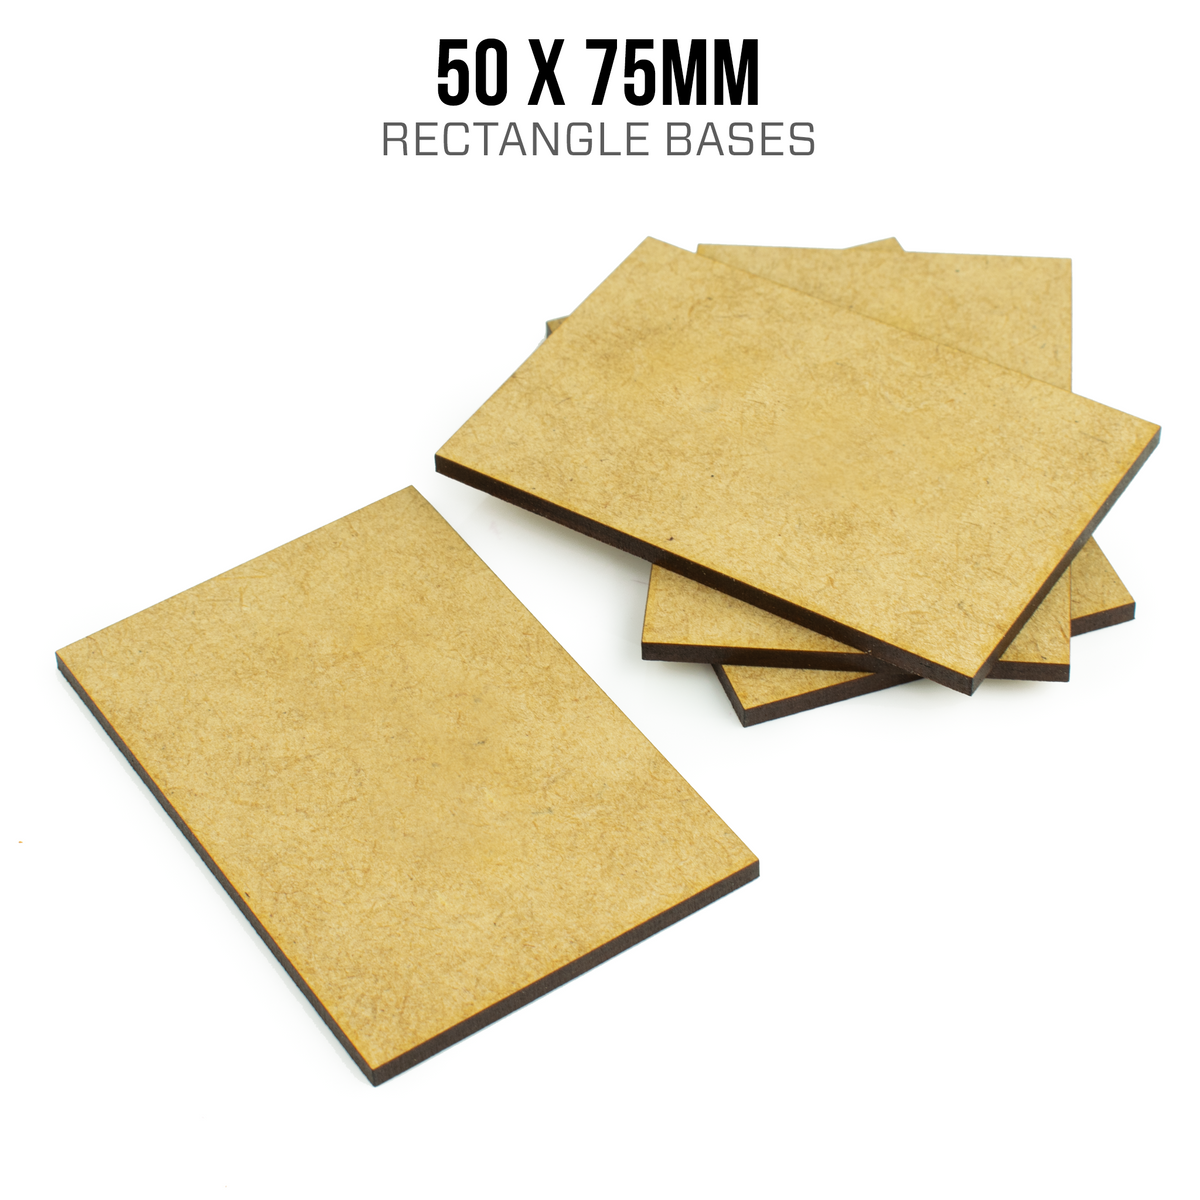 50 x 75mm Rectangle Bases